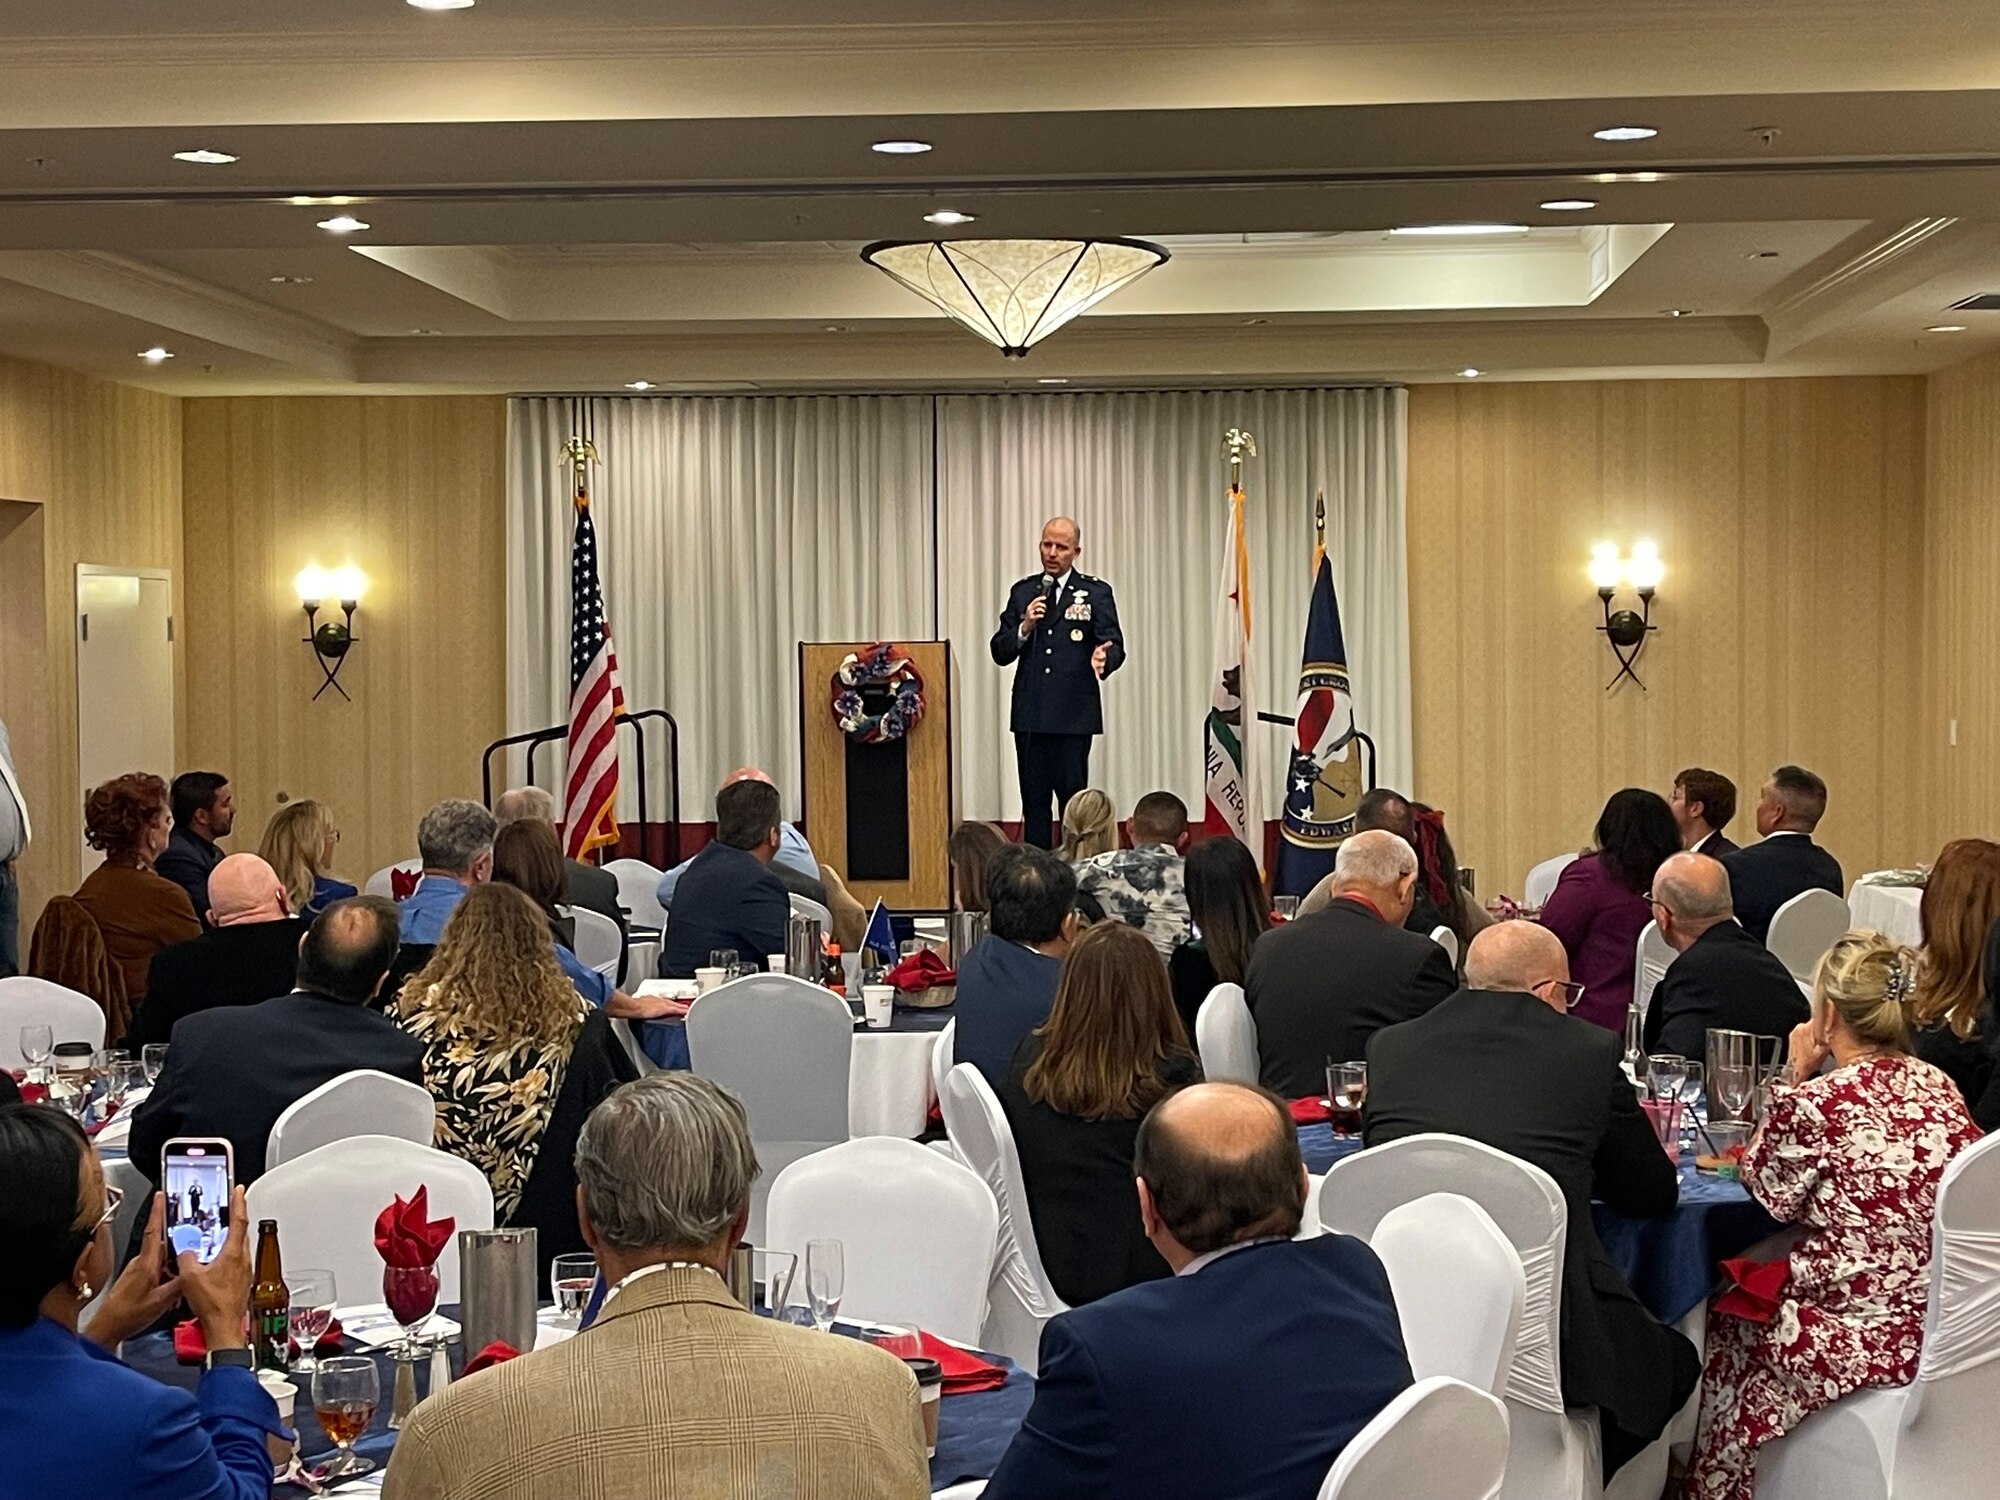 Brig. Gen. Matthew W. Higer, Commander, 412th Test Wing delivers remarks during the installation banquet for the Edwards AFB Civilian/Military Support Group (Civ/Mil) Nov.4. (U.S. Air Force Photo by Danny Bazzell)